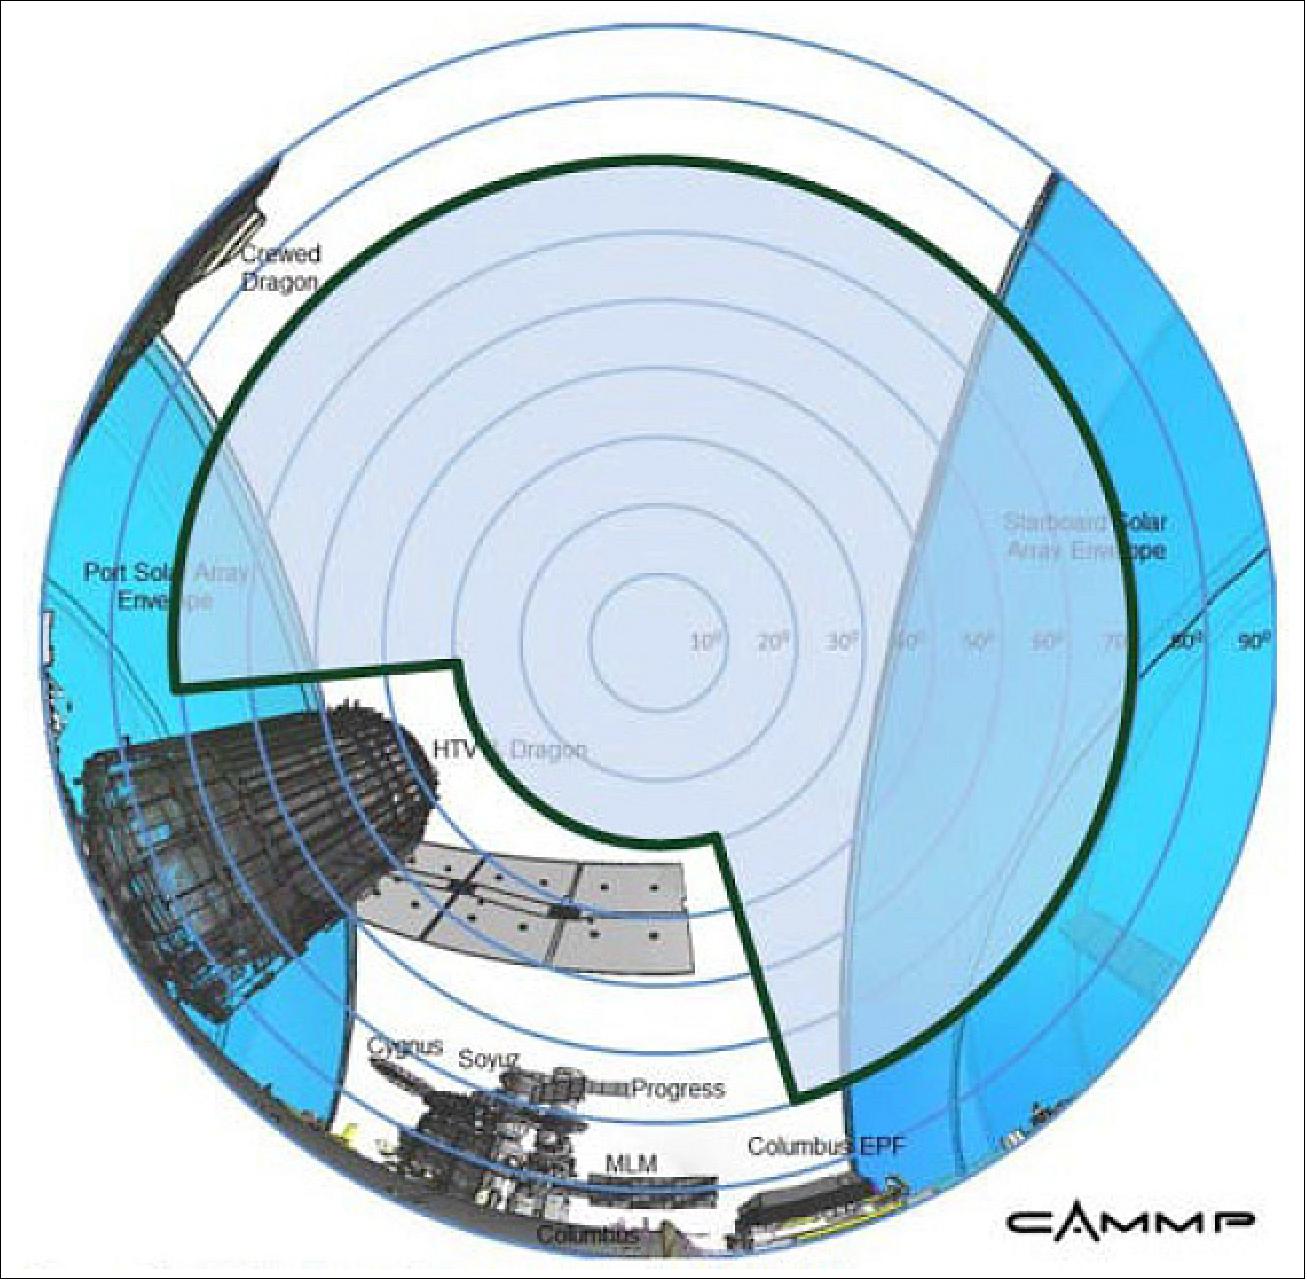 Figure 23: Usable field of view for the OSIRISv3 terminal with areas of temporal obstruction by the ISS solar arrays indicated in blue (image credit: DLR-IKN)